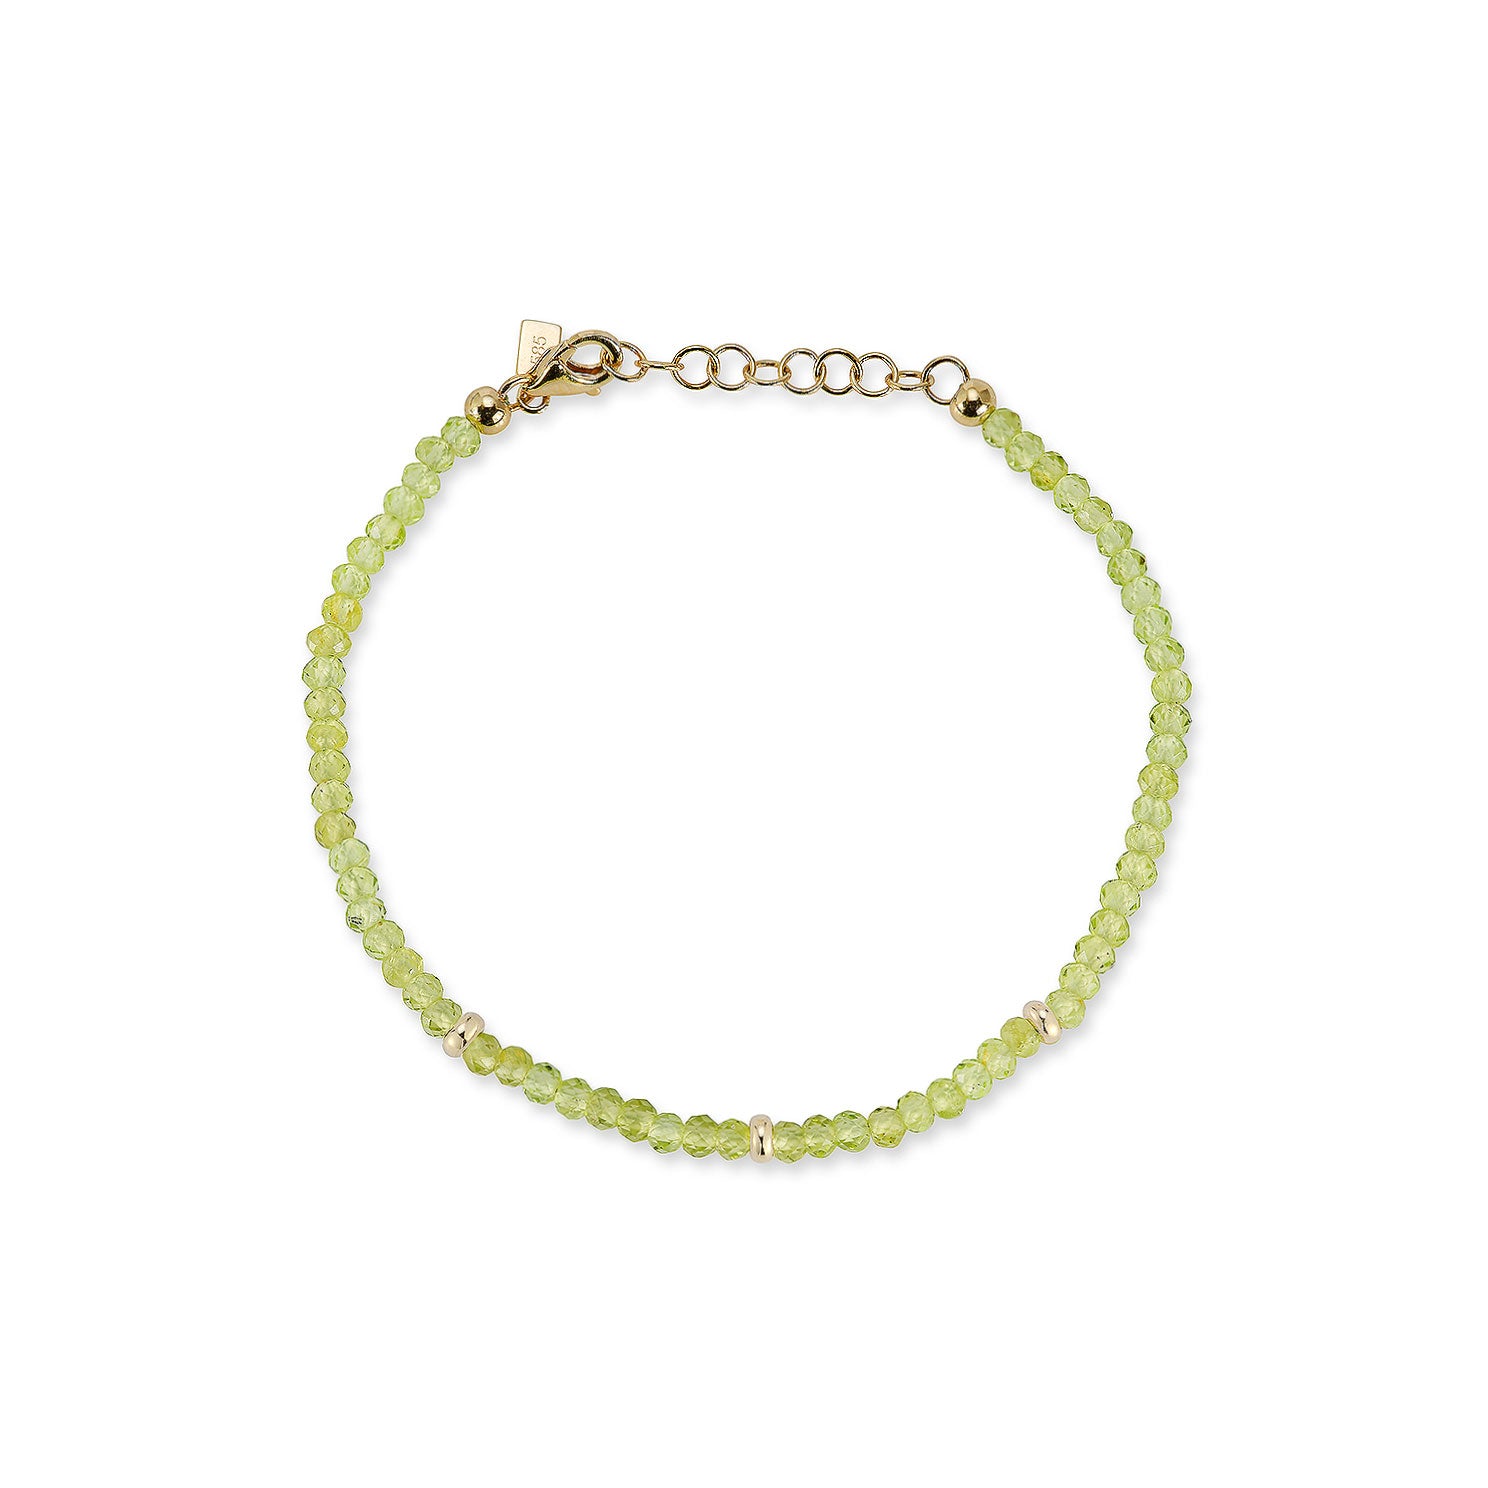 Birthstone Bead Bracelet In Peridot with 14k yellow gold chain